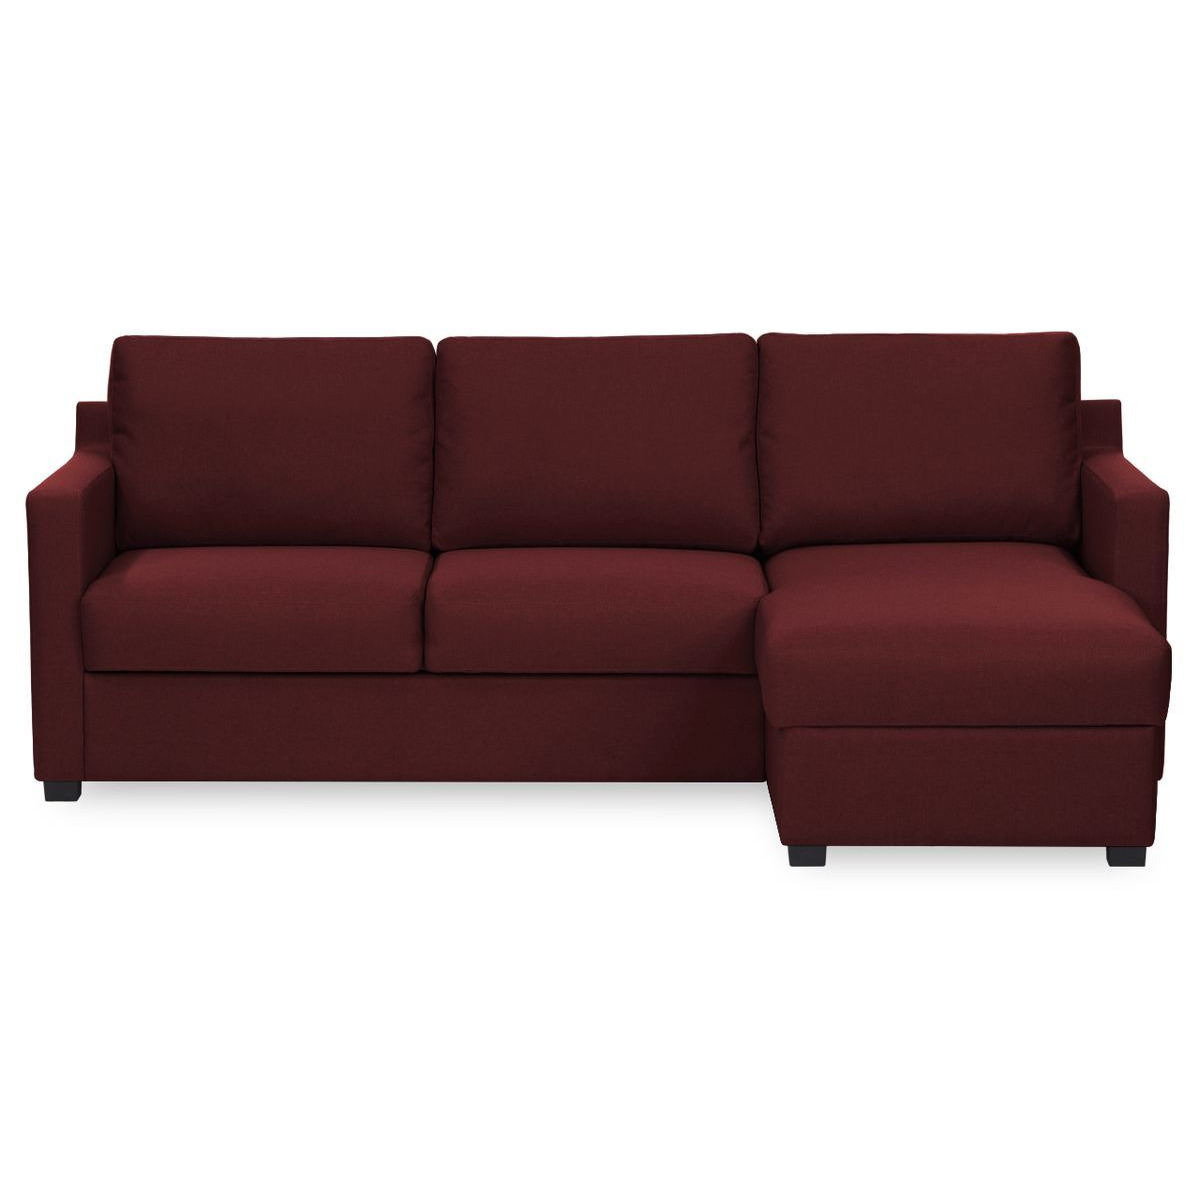 Kropp Right Hand Corner Sofa Bed With Storage, red - image 1